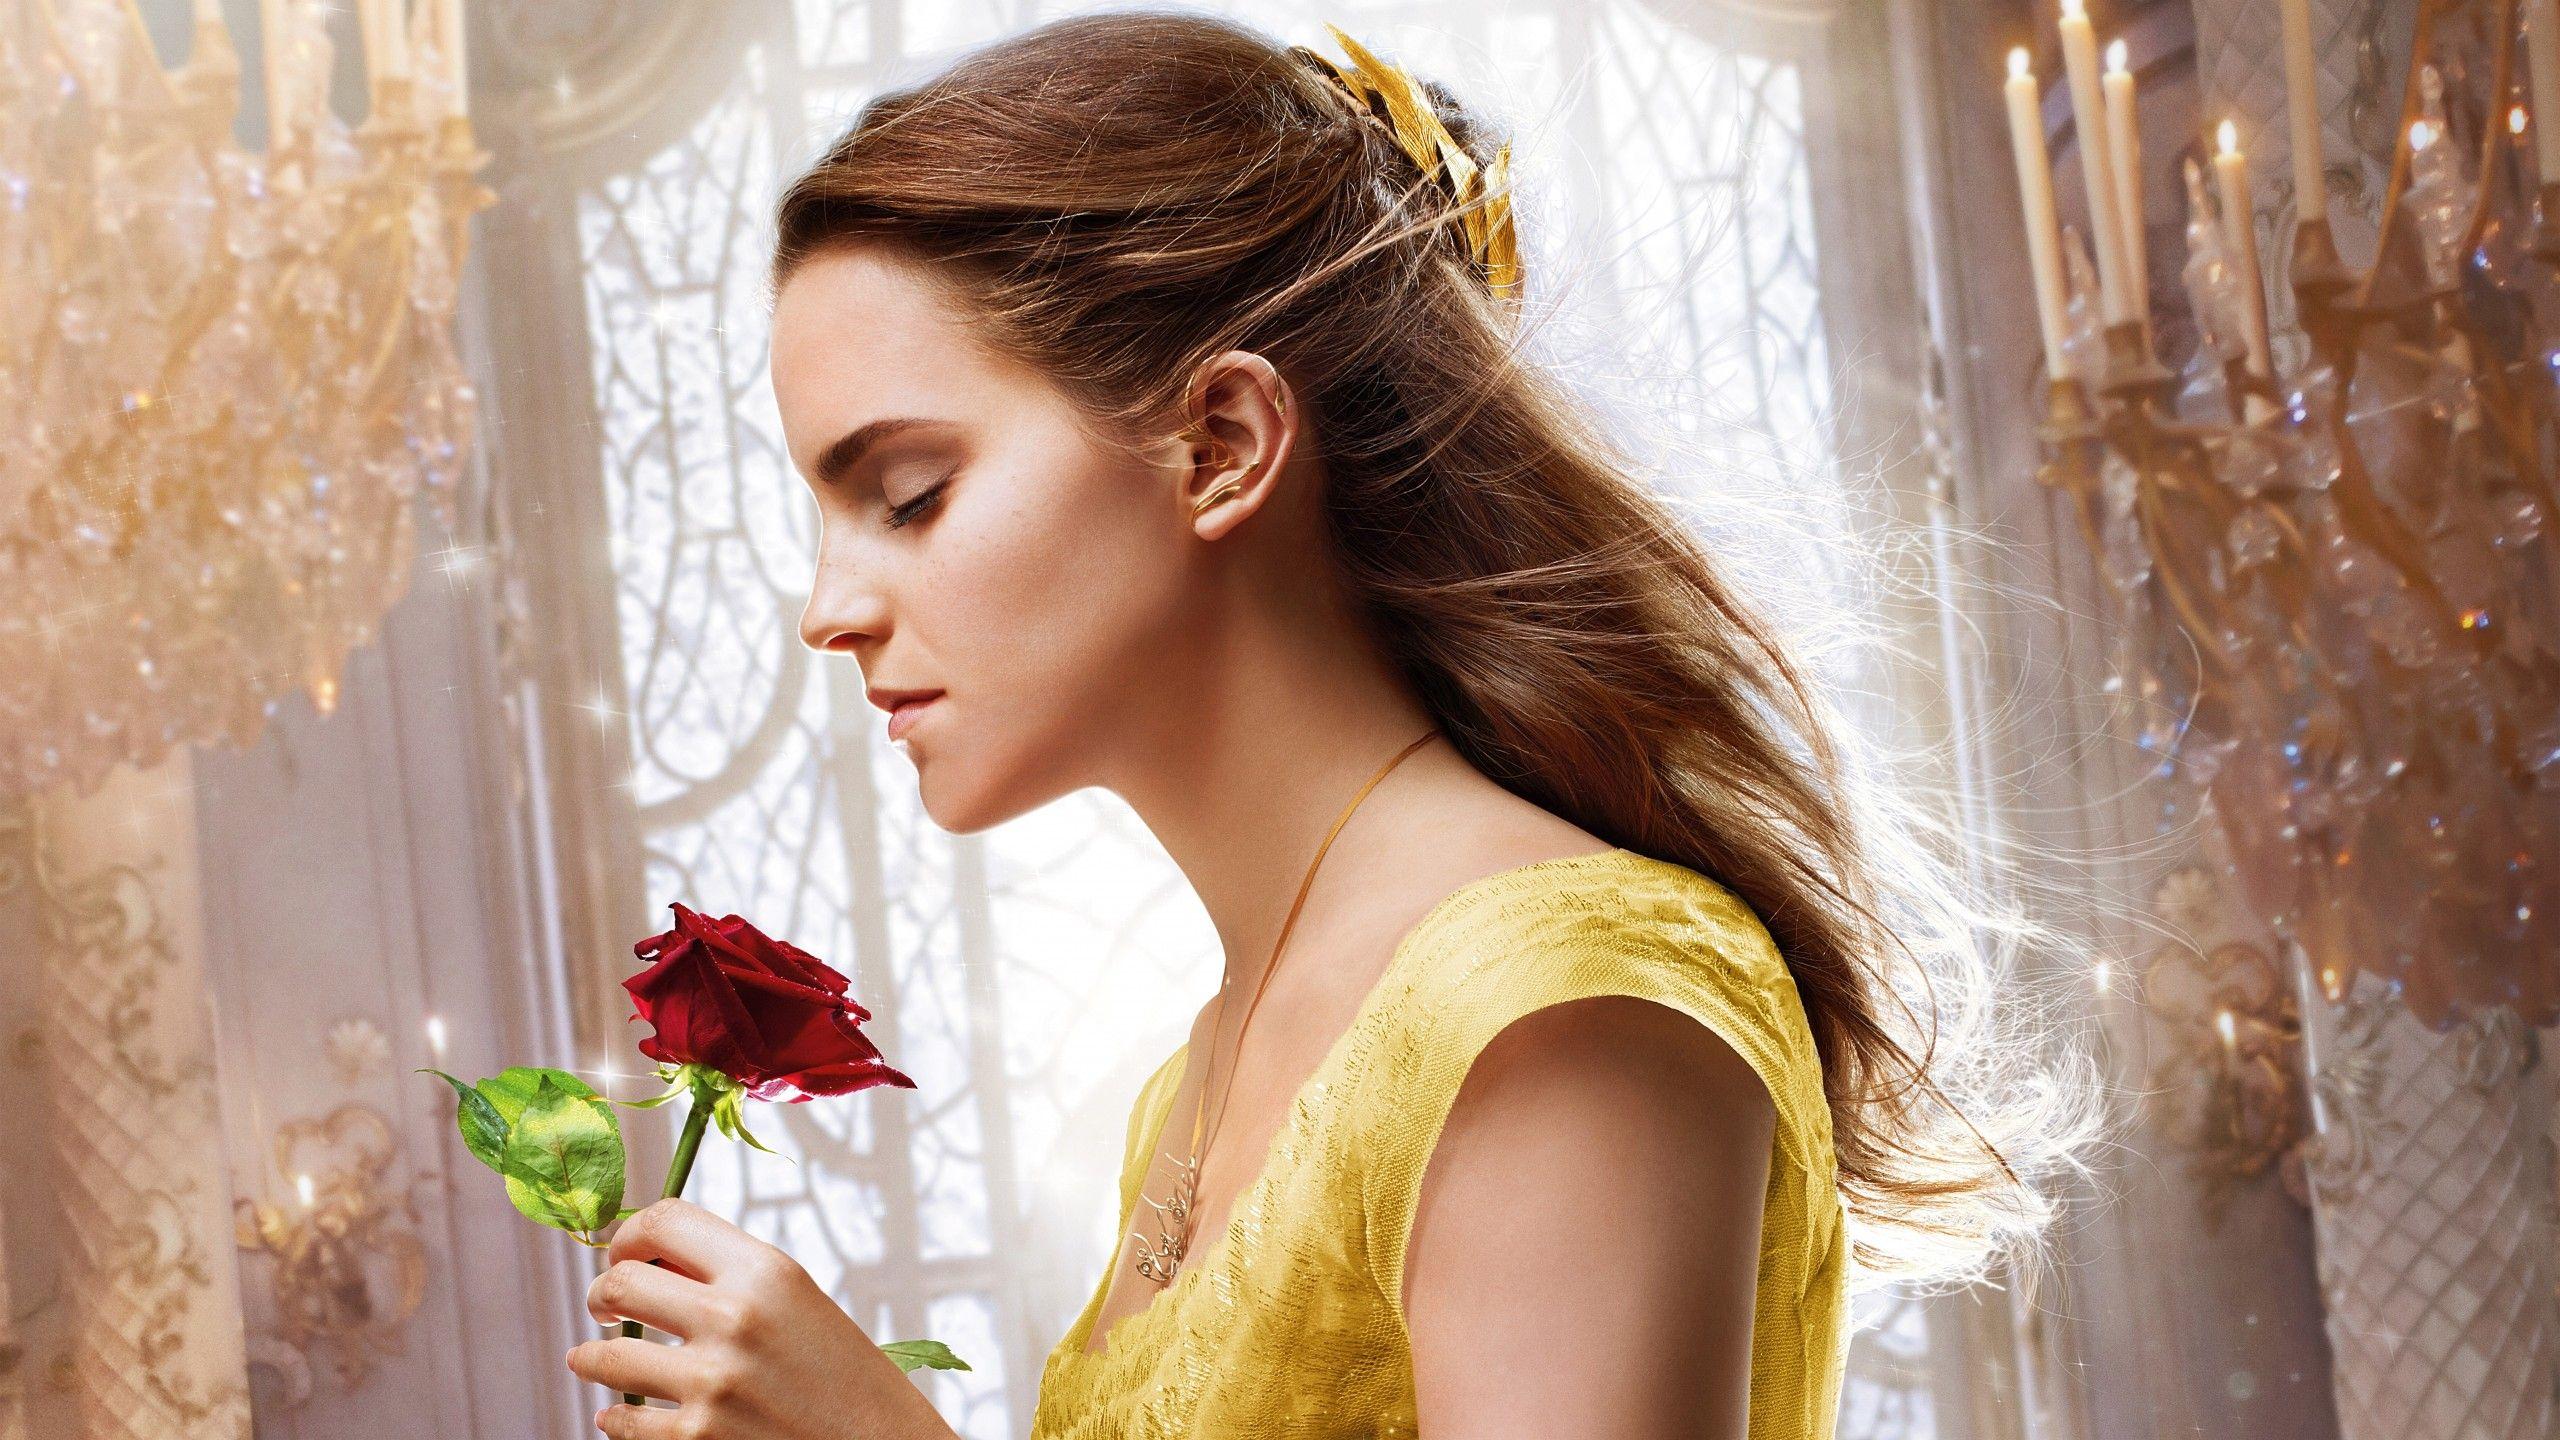 Wallpaper Emma Watson, Beauty and the Beast, Belle, Movies